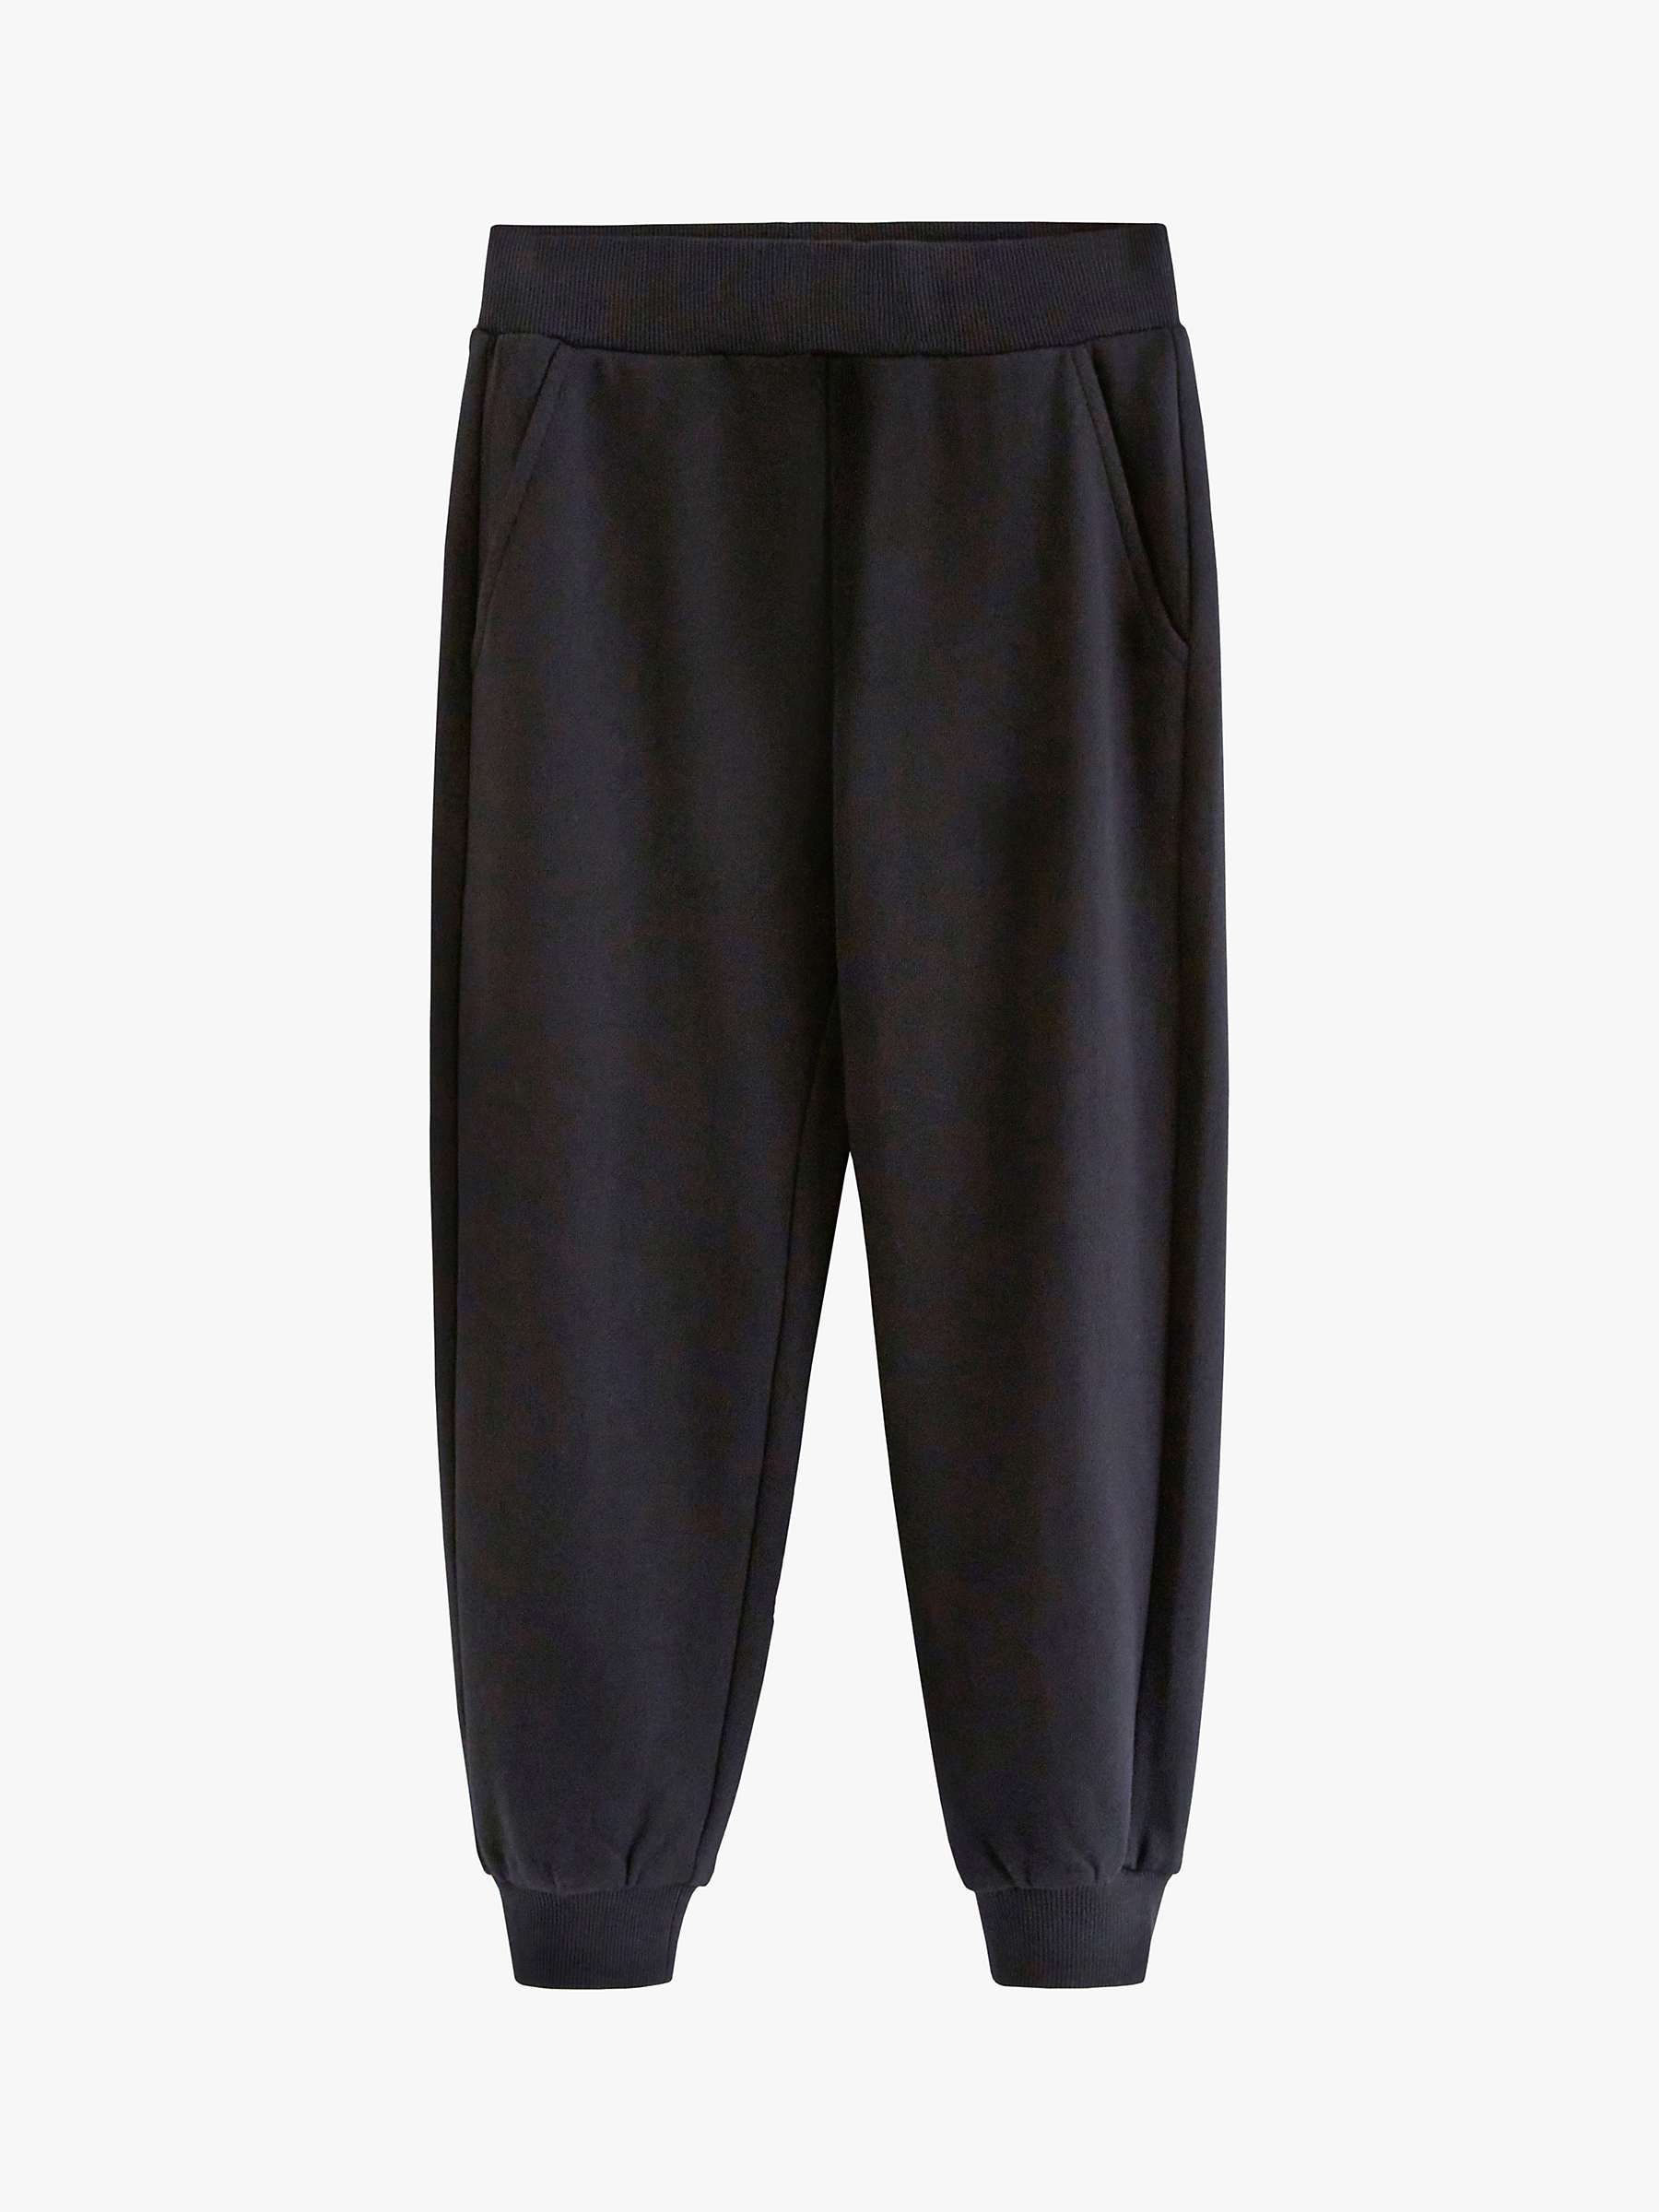 Buy Lindex Kids' Extra Durable Trousers, Black Online at johnlewis.com